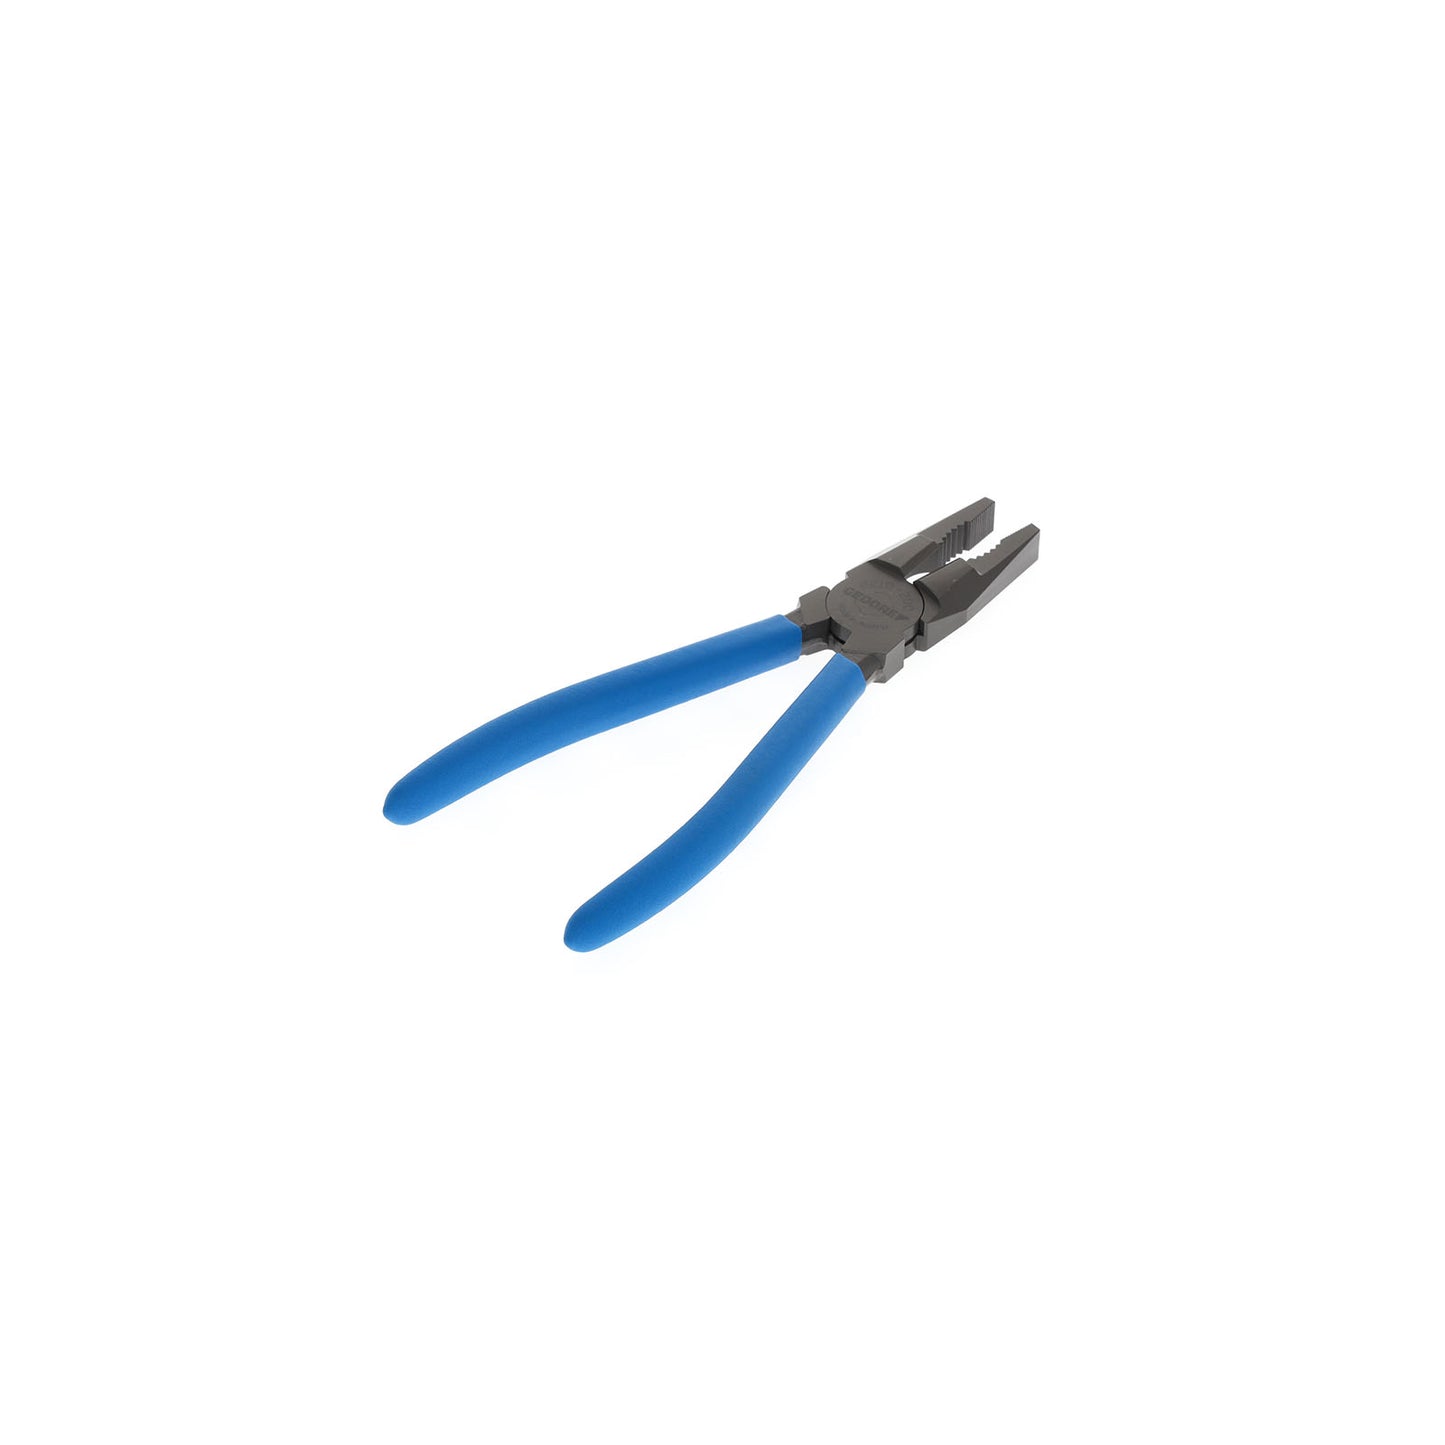 GEDORE 8210-200 TL - Universal pliers 200 mm (6711850)